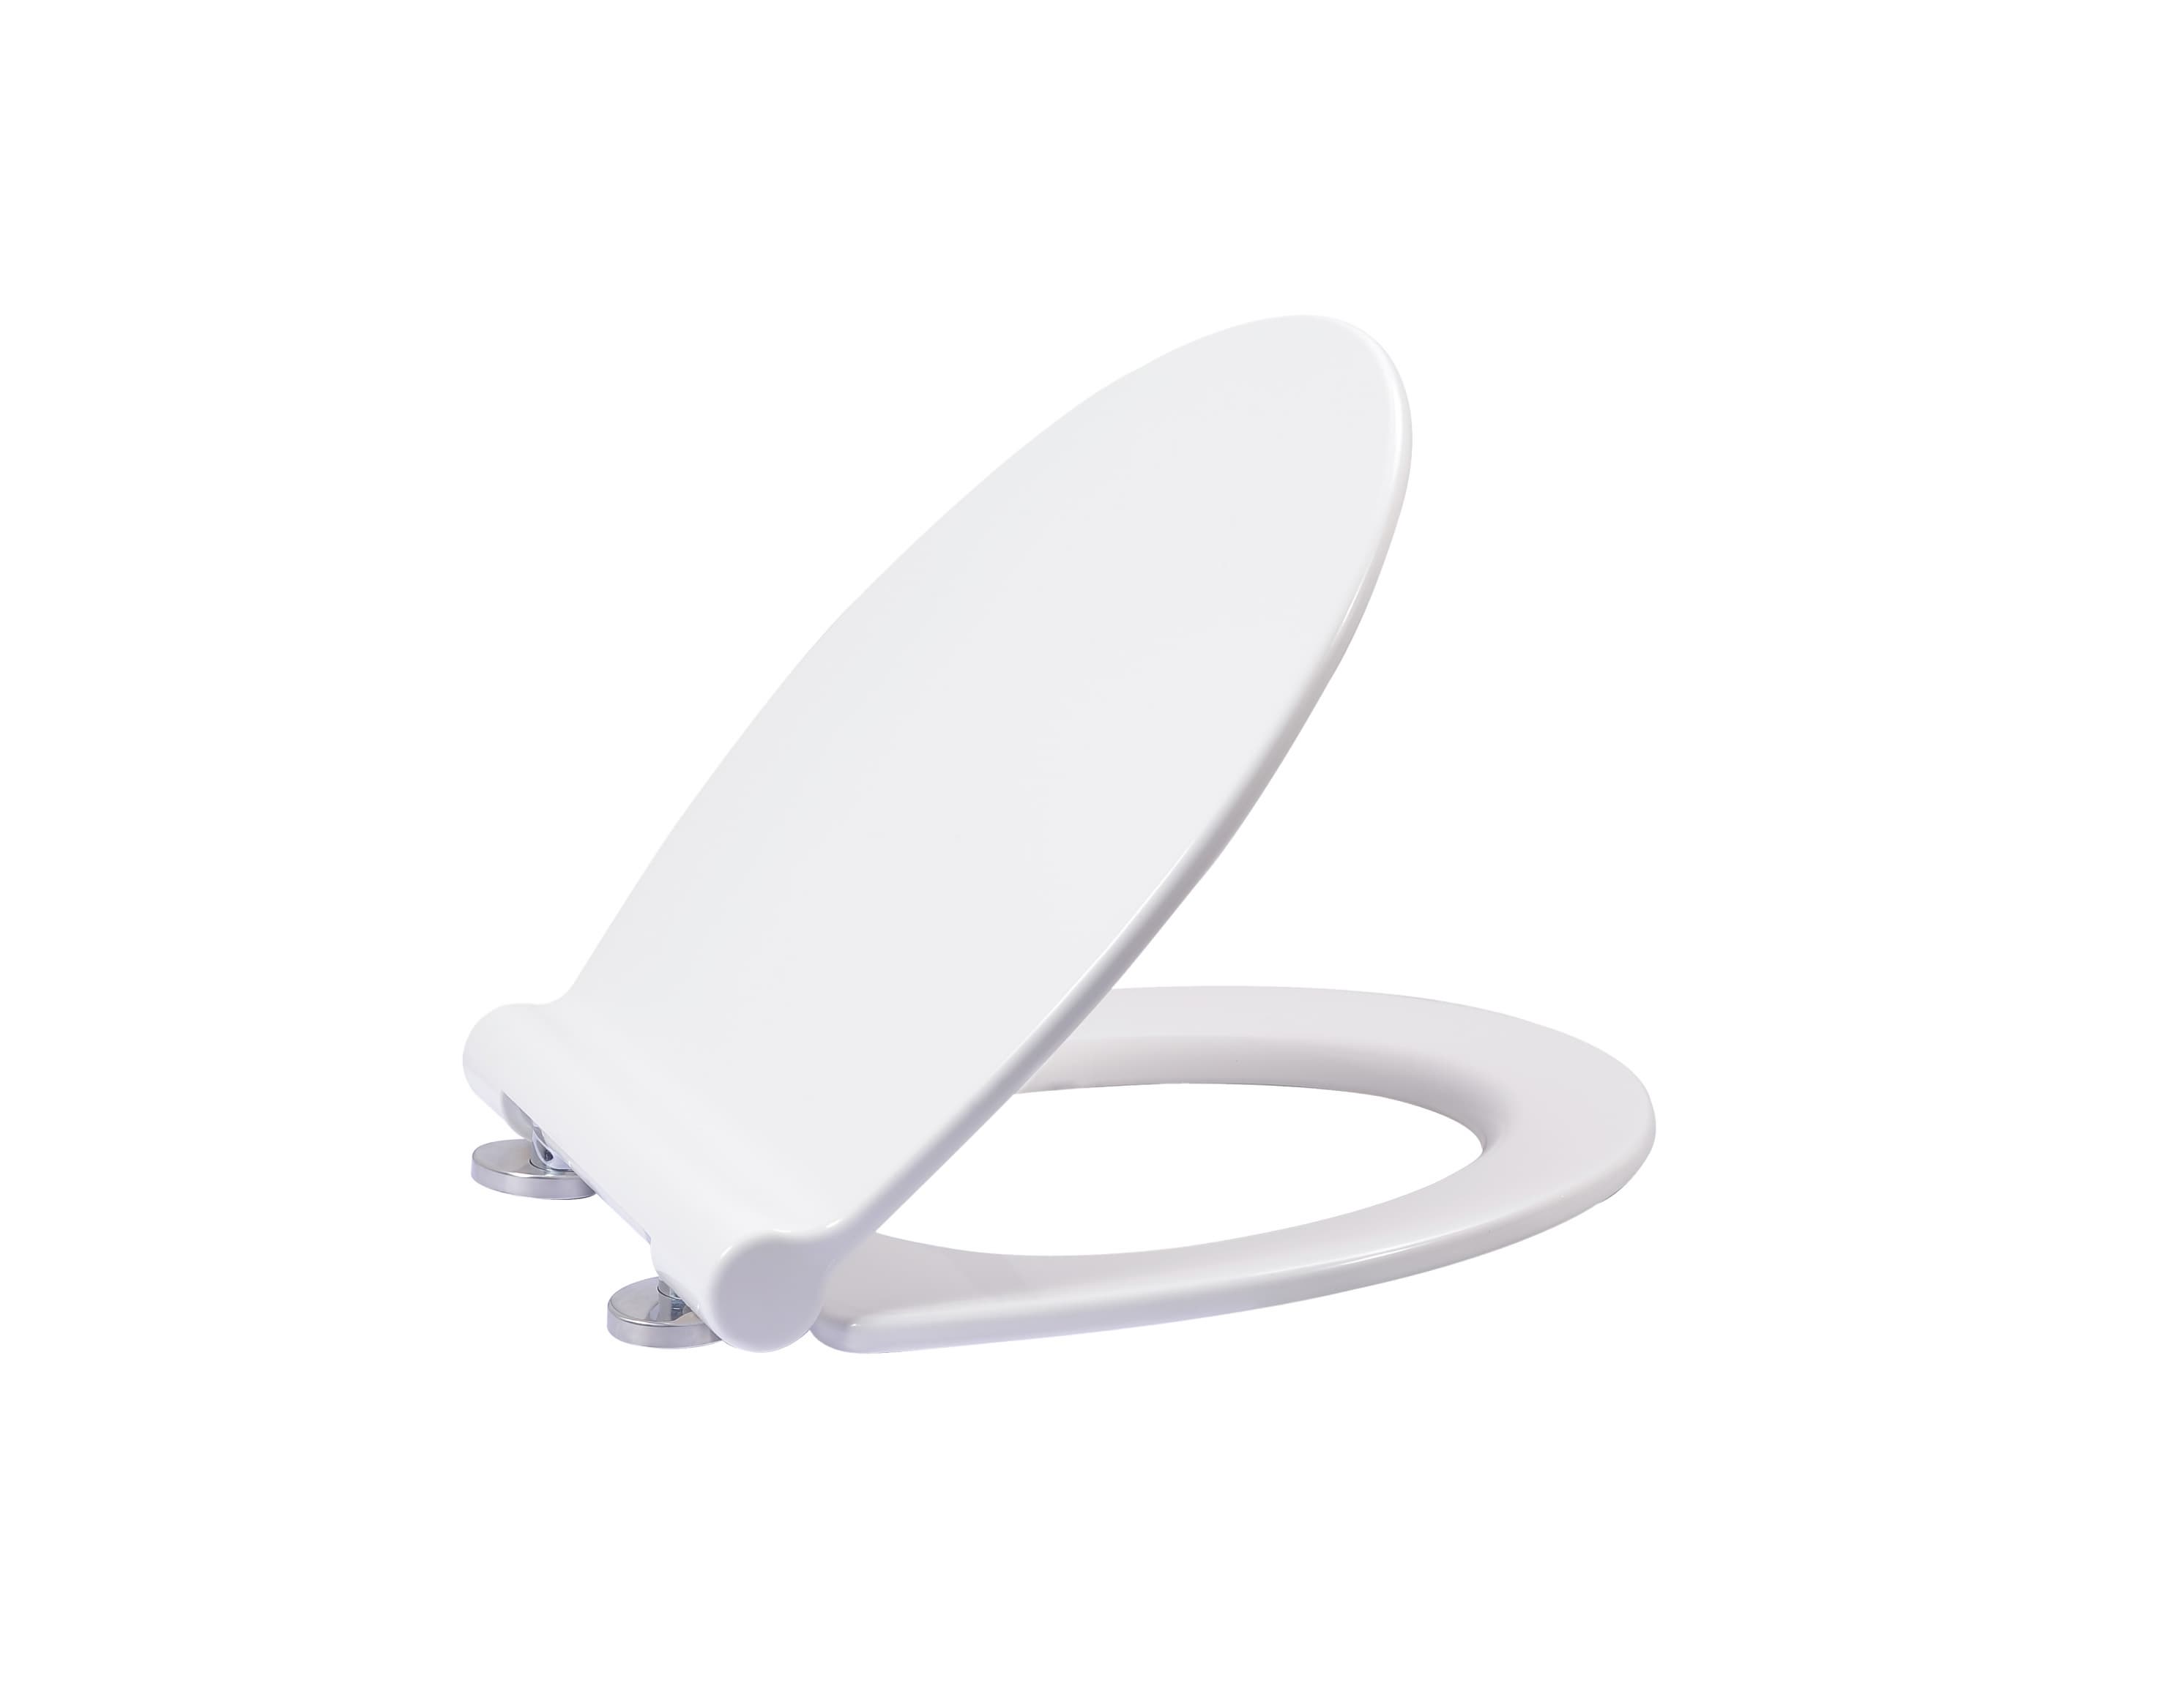 Magnetic quick release WC toilet seat cover for bathroom